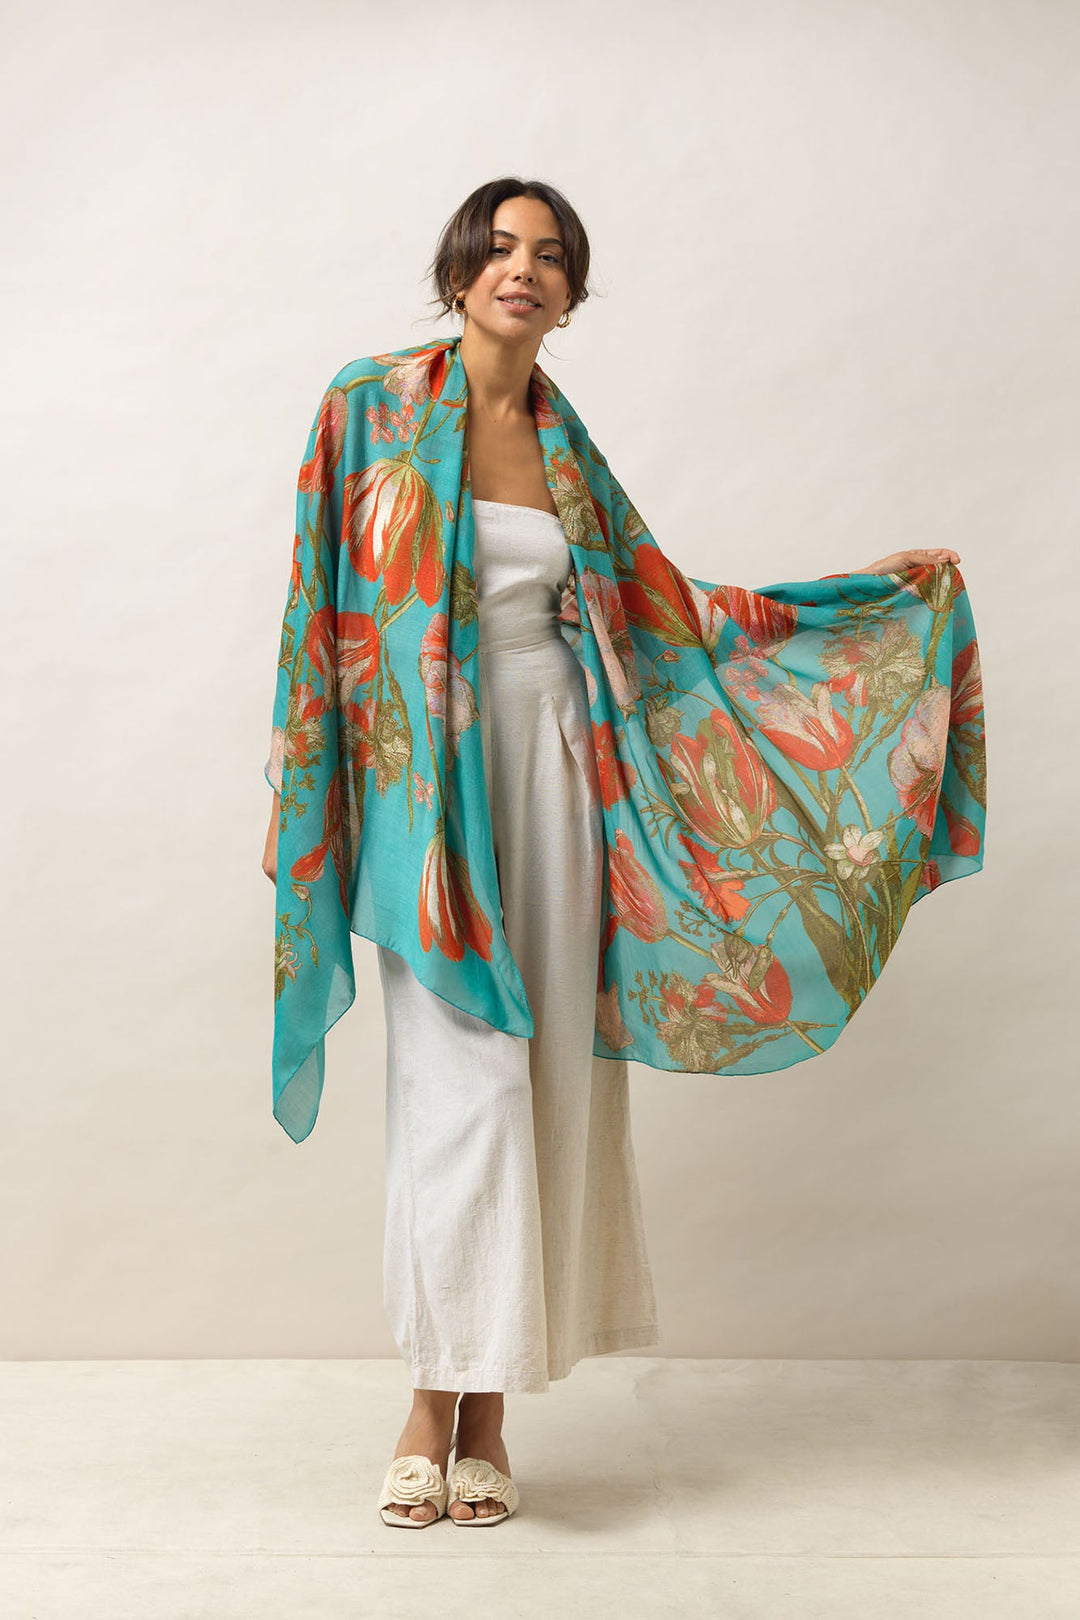 Women's accessories, gifts for her. Large scarf in blue with tulip floral print by One Hundred Stars